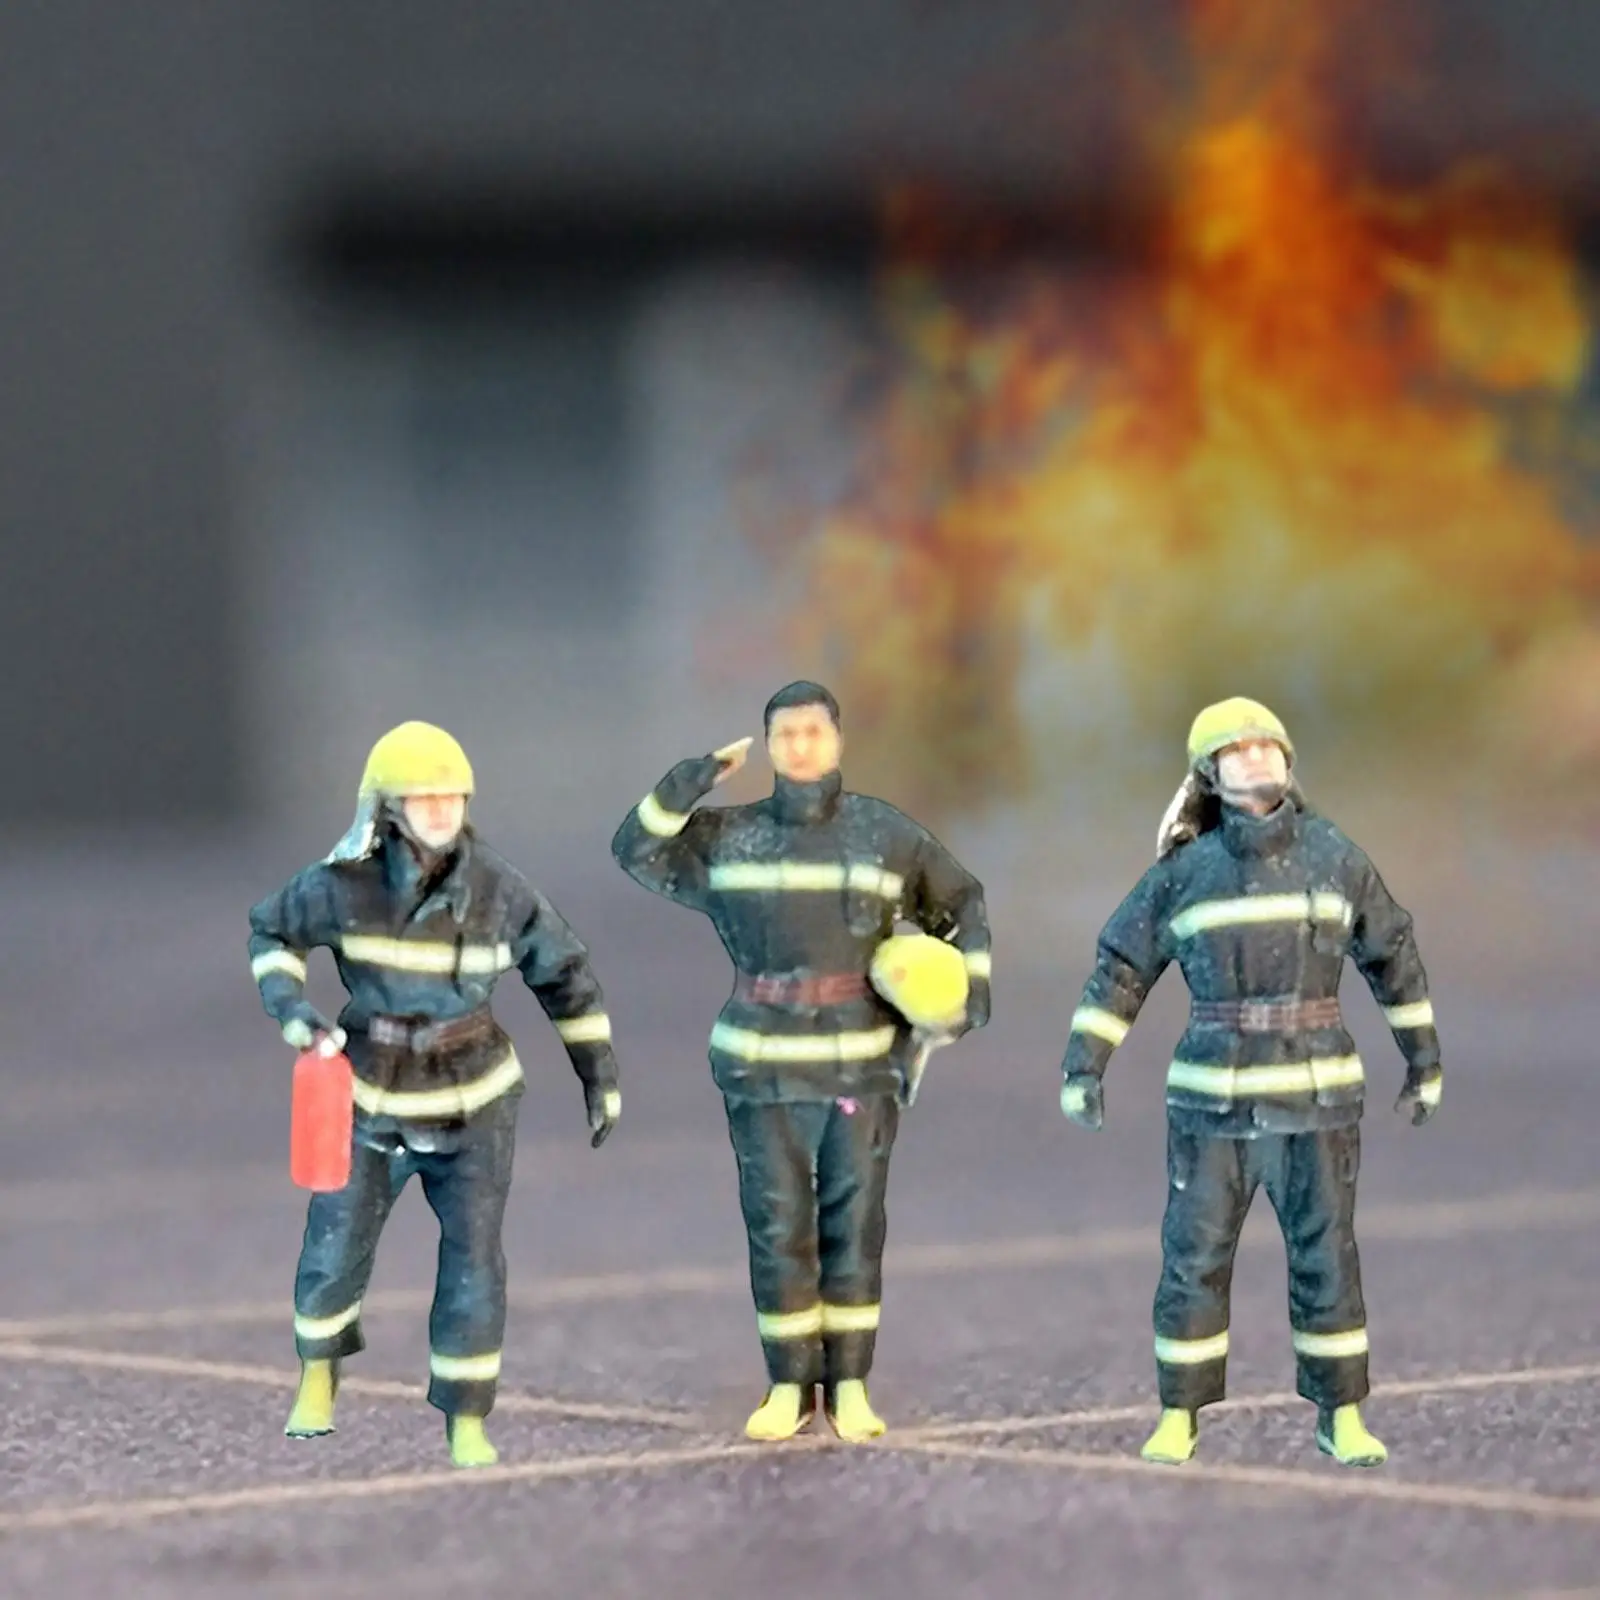 1/64 Resin Firefighter Figures Collectibles Miniature Model Model Trains People Figures for Micro Landscapes Diorama Decoration